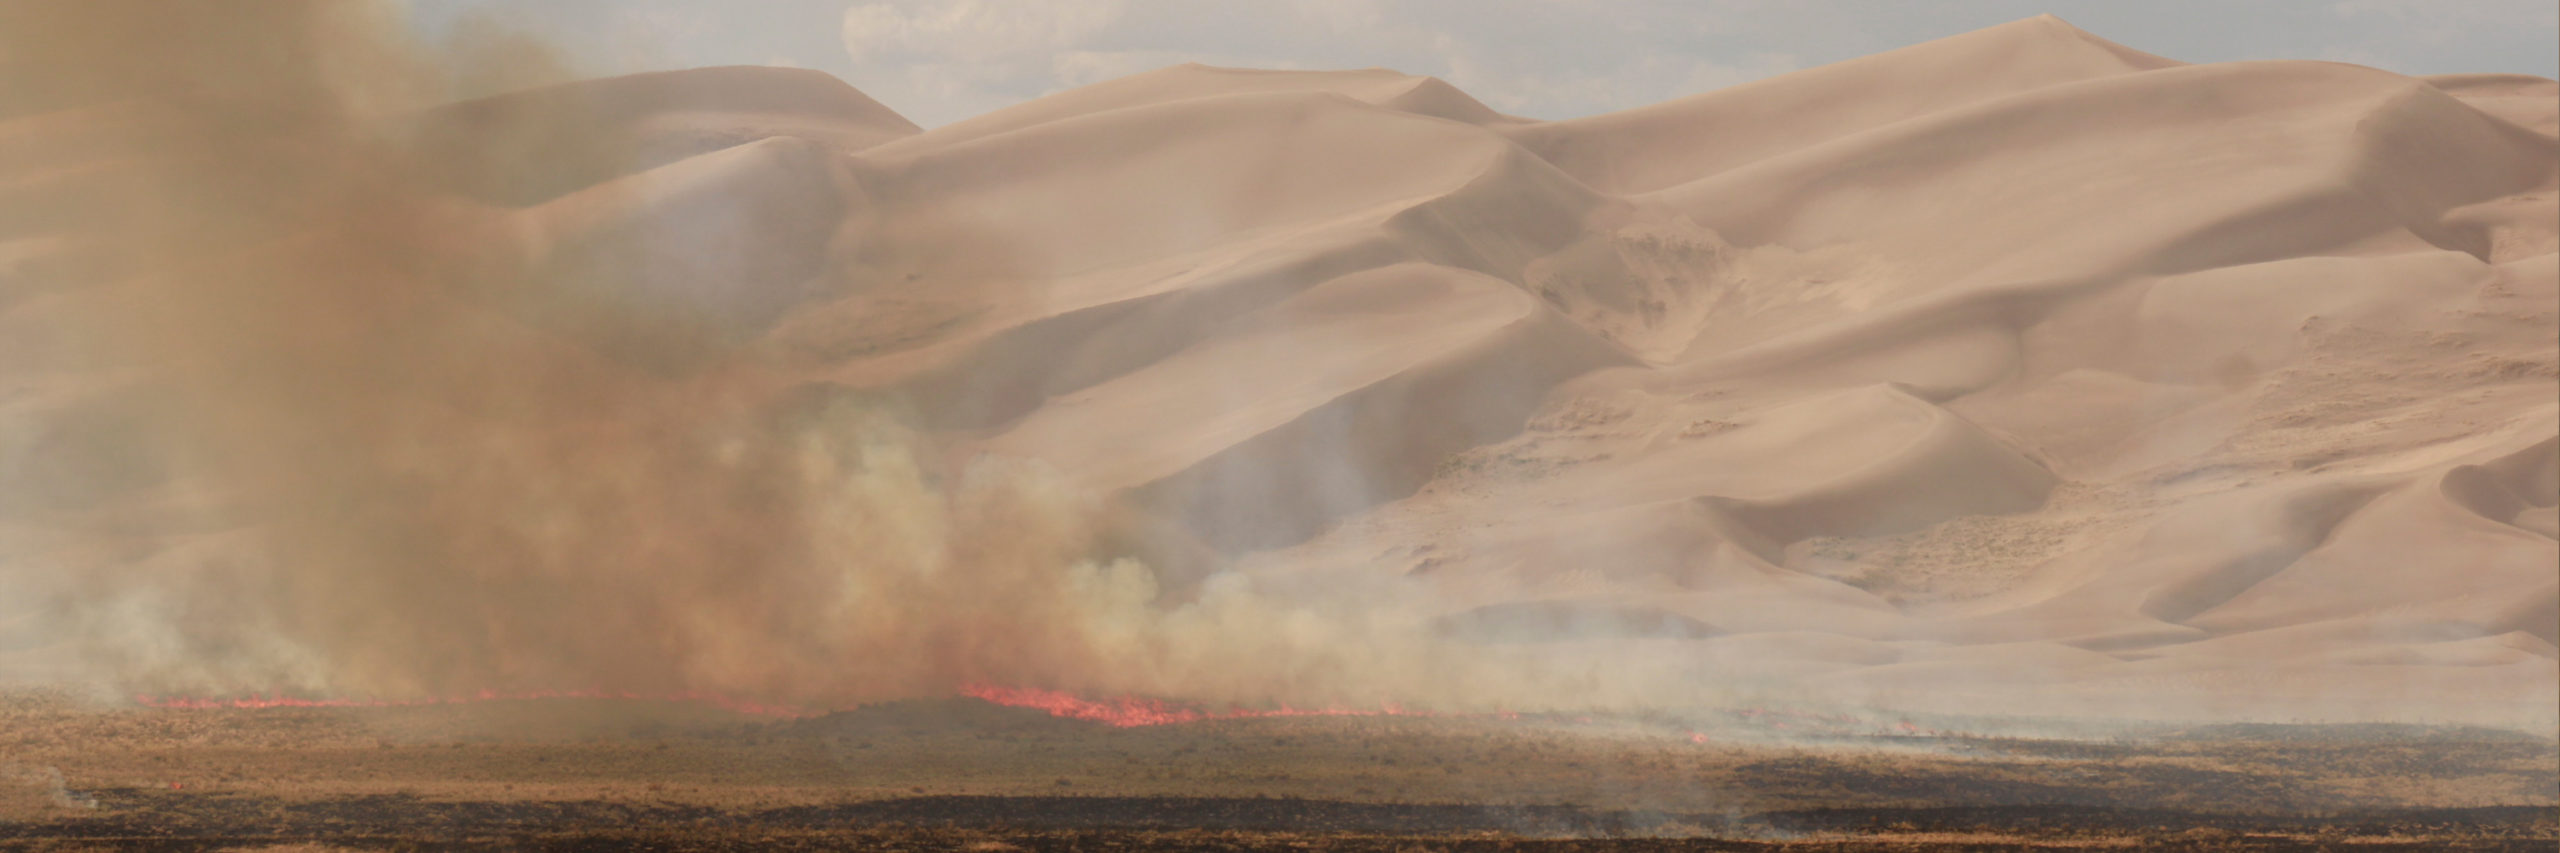 fire and smoke with the Sand Dunes visible in the background